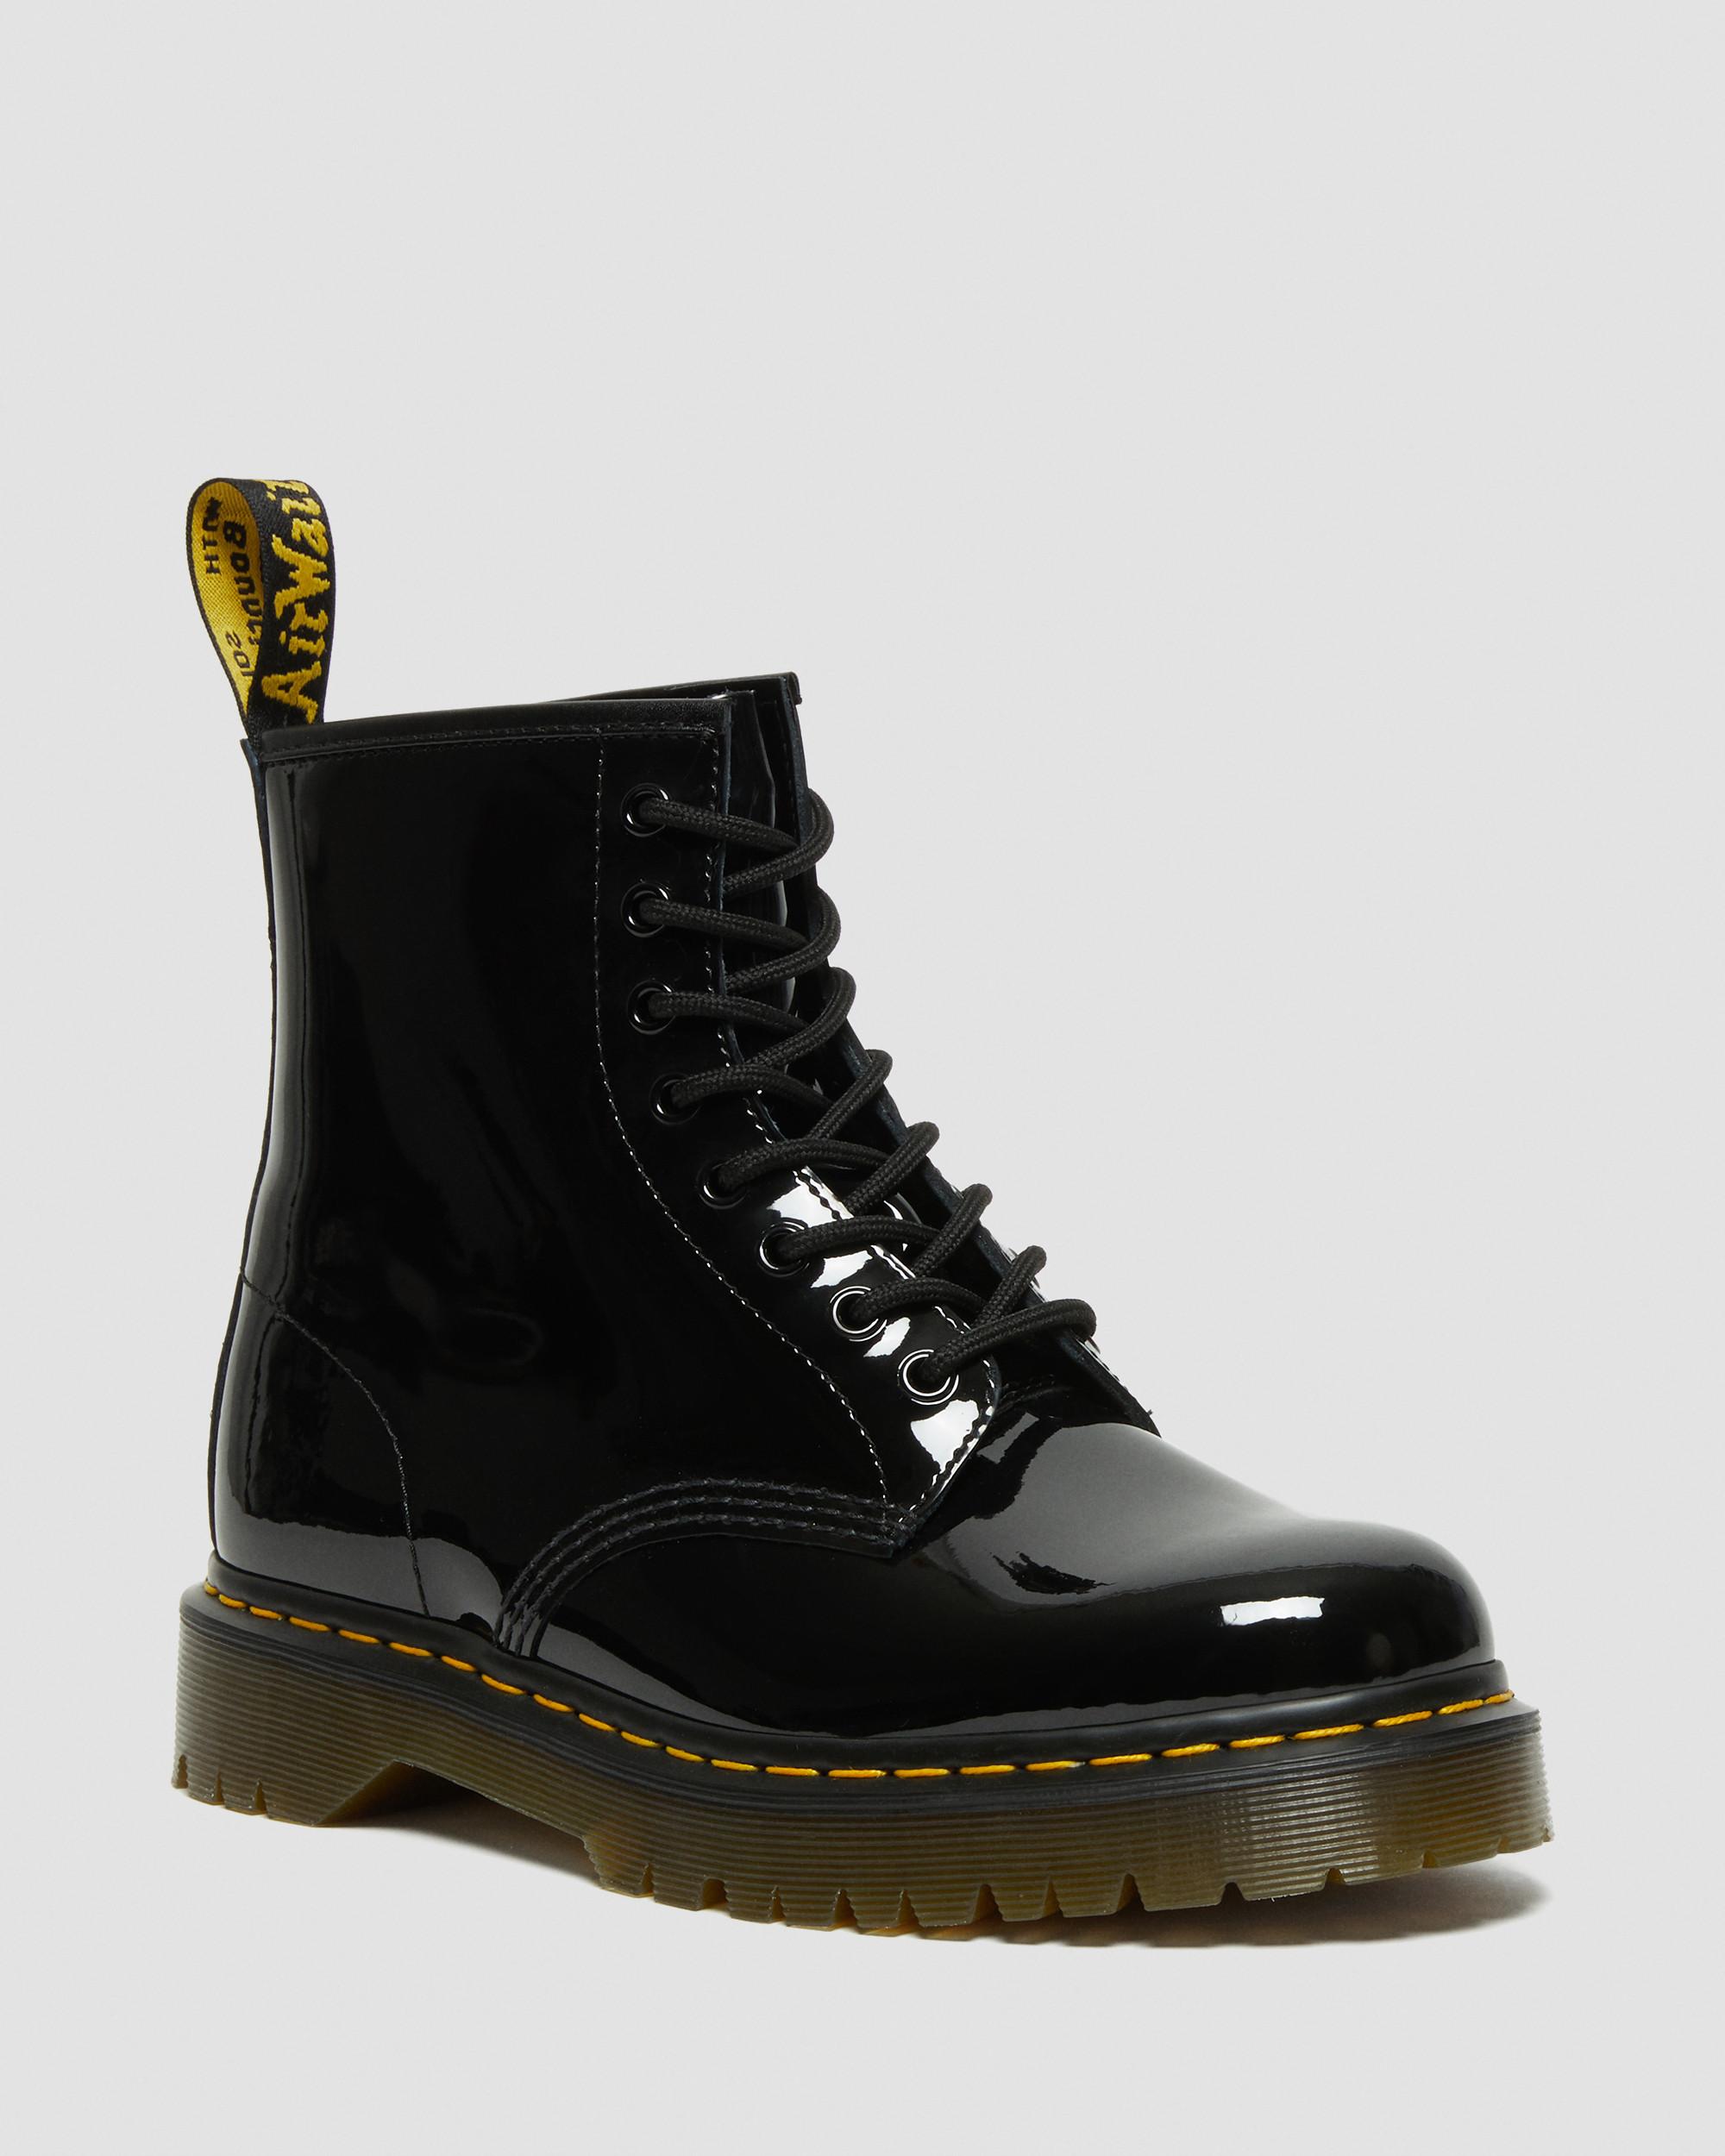 DR MARTENS 1460 Bex Patent Leather Lace Up Boots